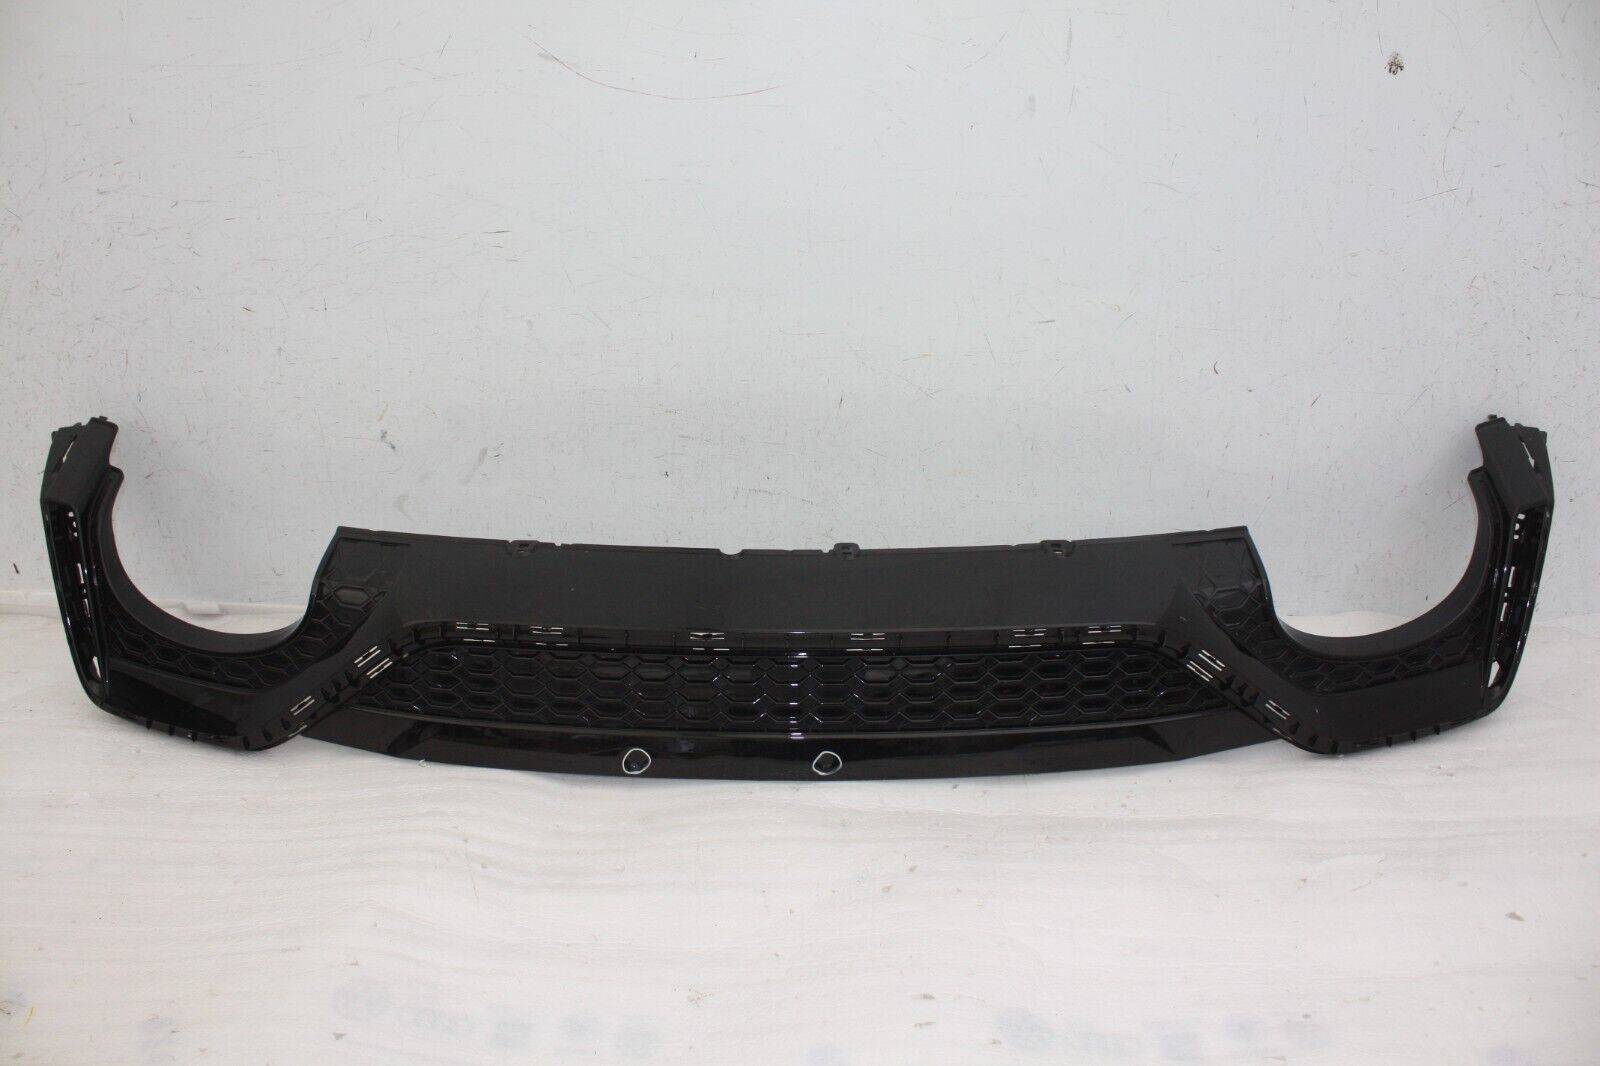 Audi RS6 RS7 C8 Rear Bumper Lower Section 4K8807514 Genuine 176393224078